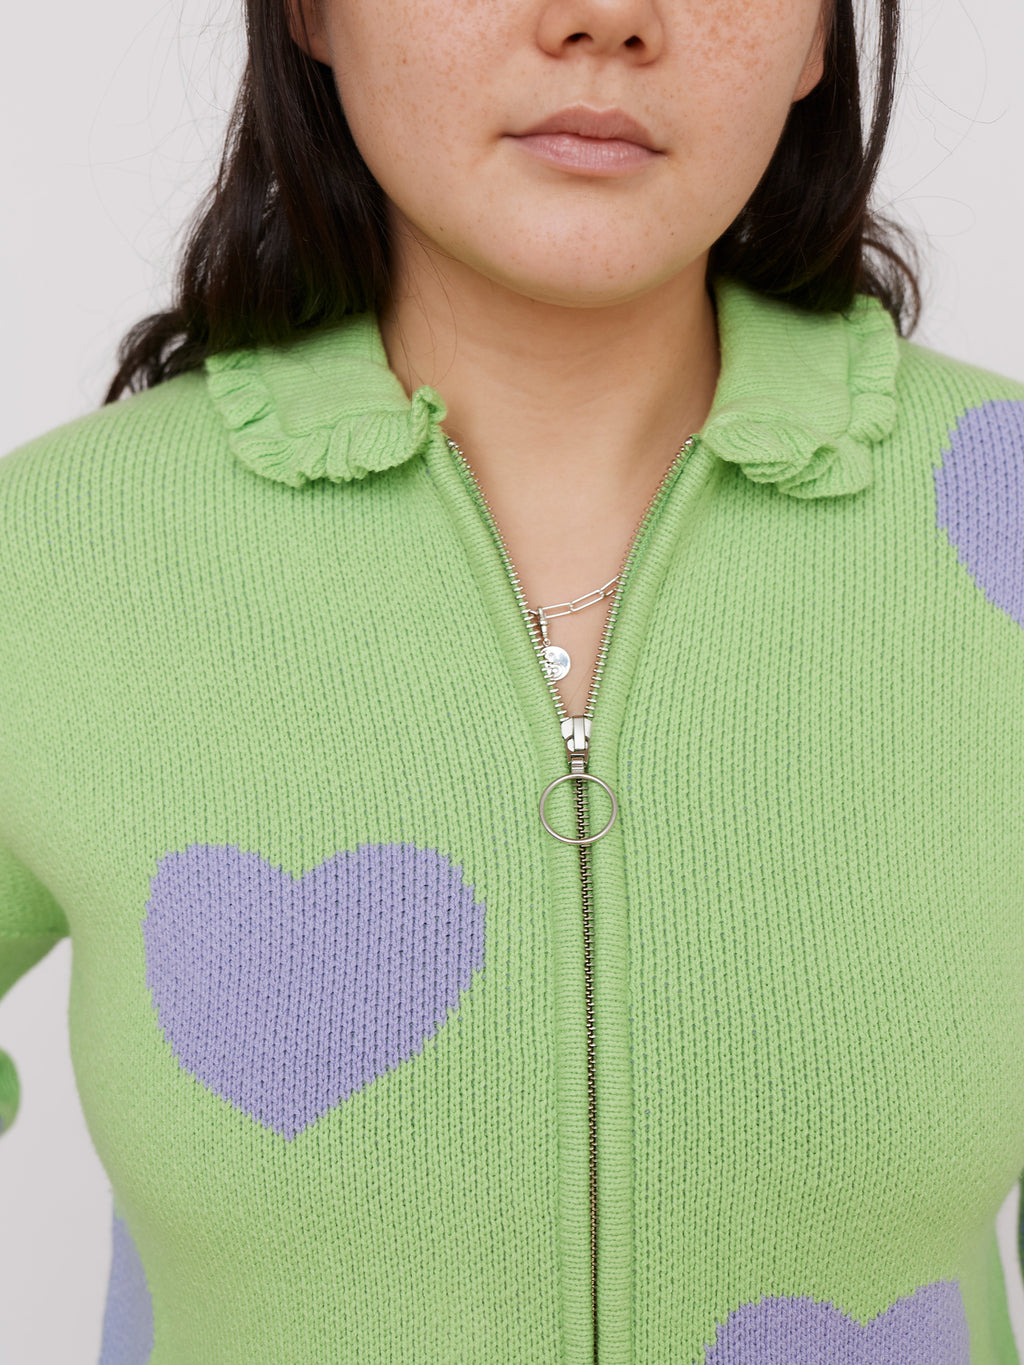 Lazy Oaf Love Me Forever Minty Zip Up Cardigan